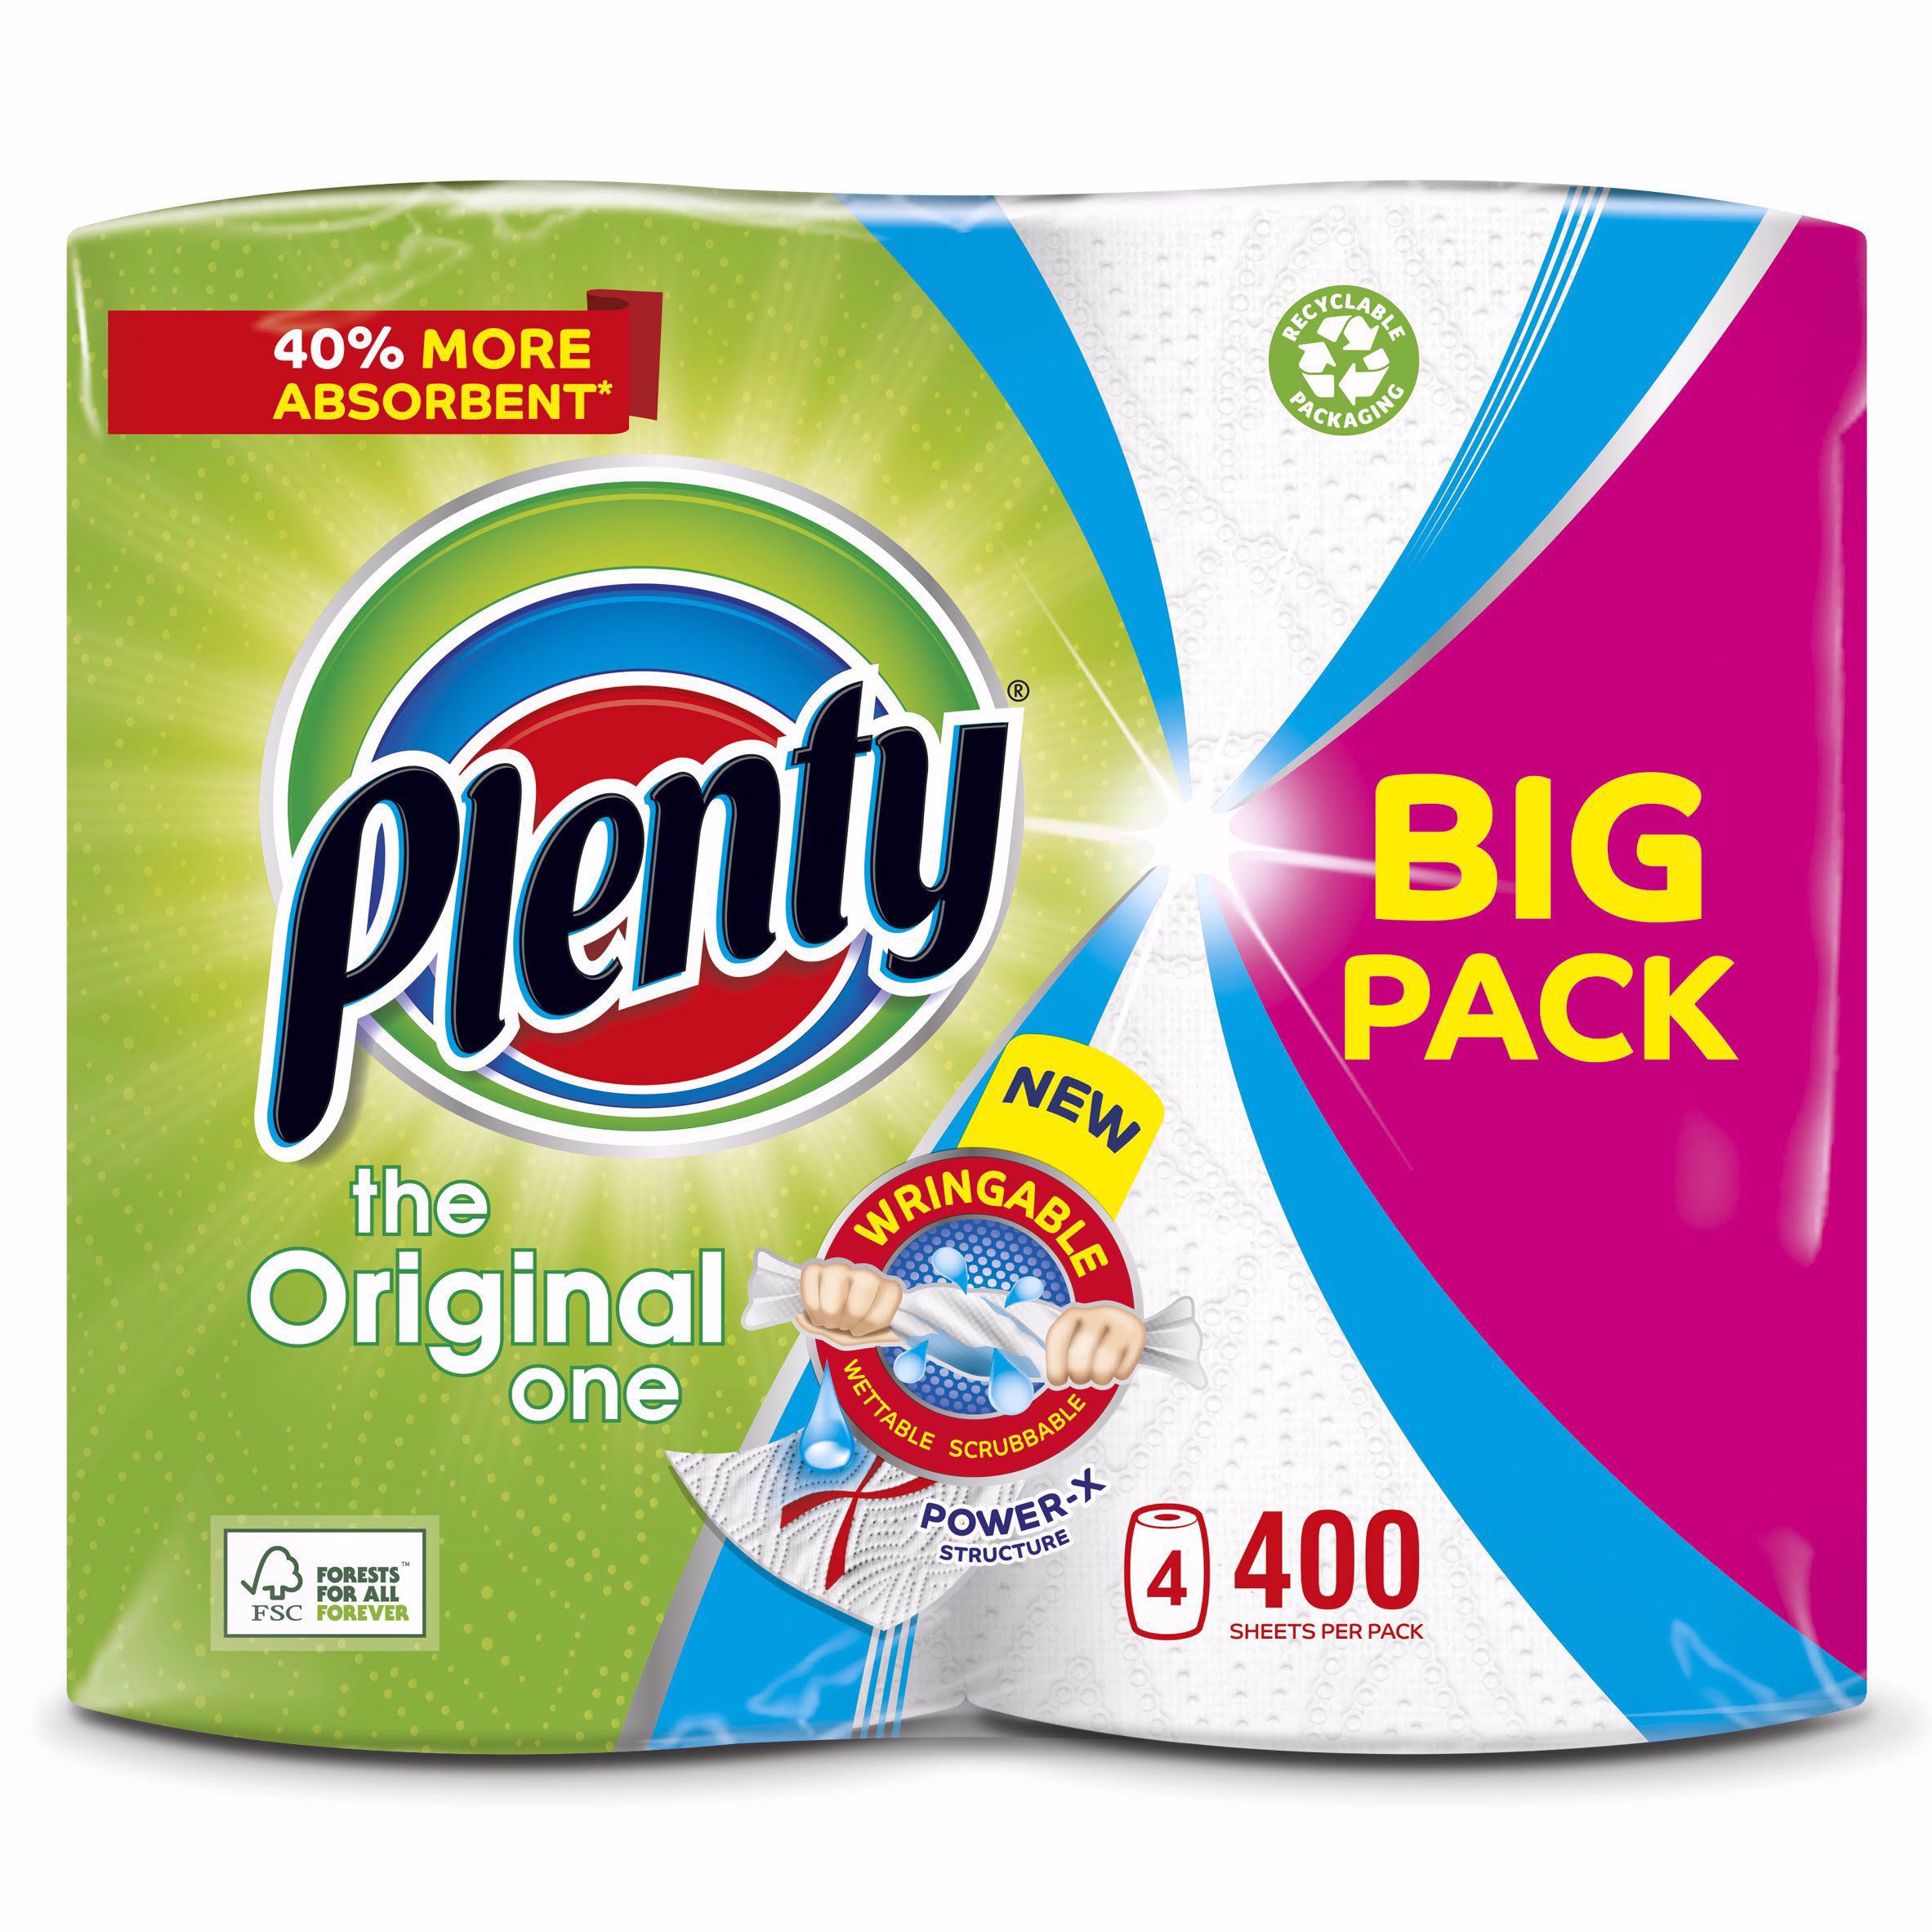 Plenty Kitchen Rolls The Original One 2 Ply 100 Sheets Pack of 4